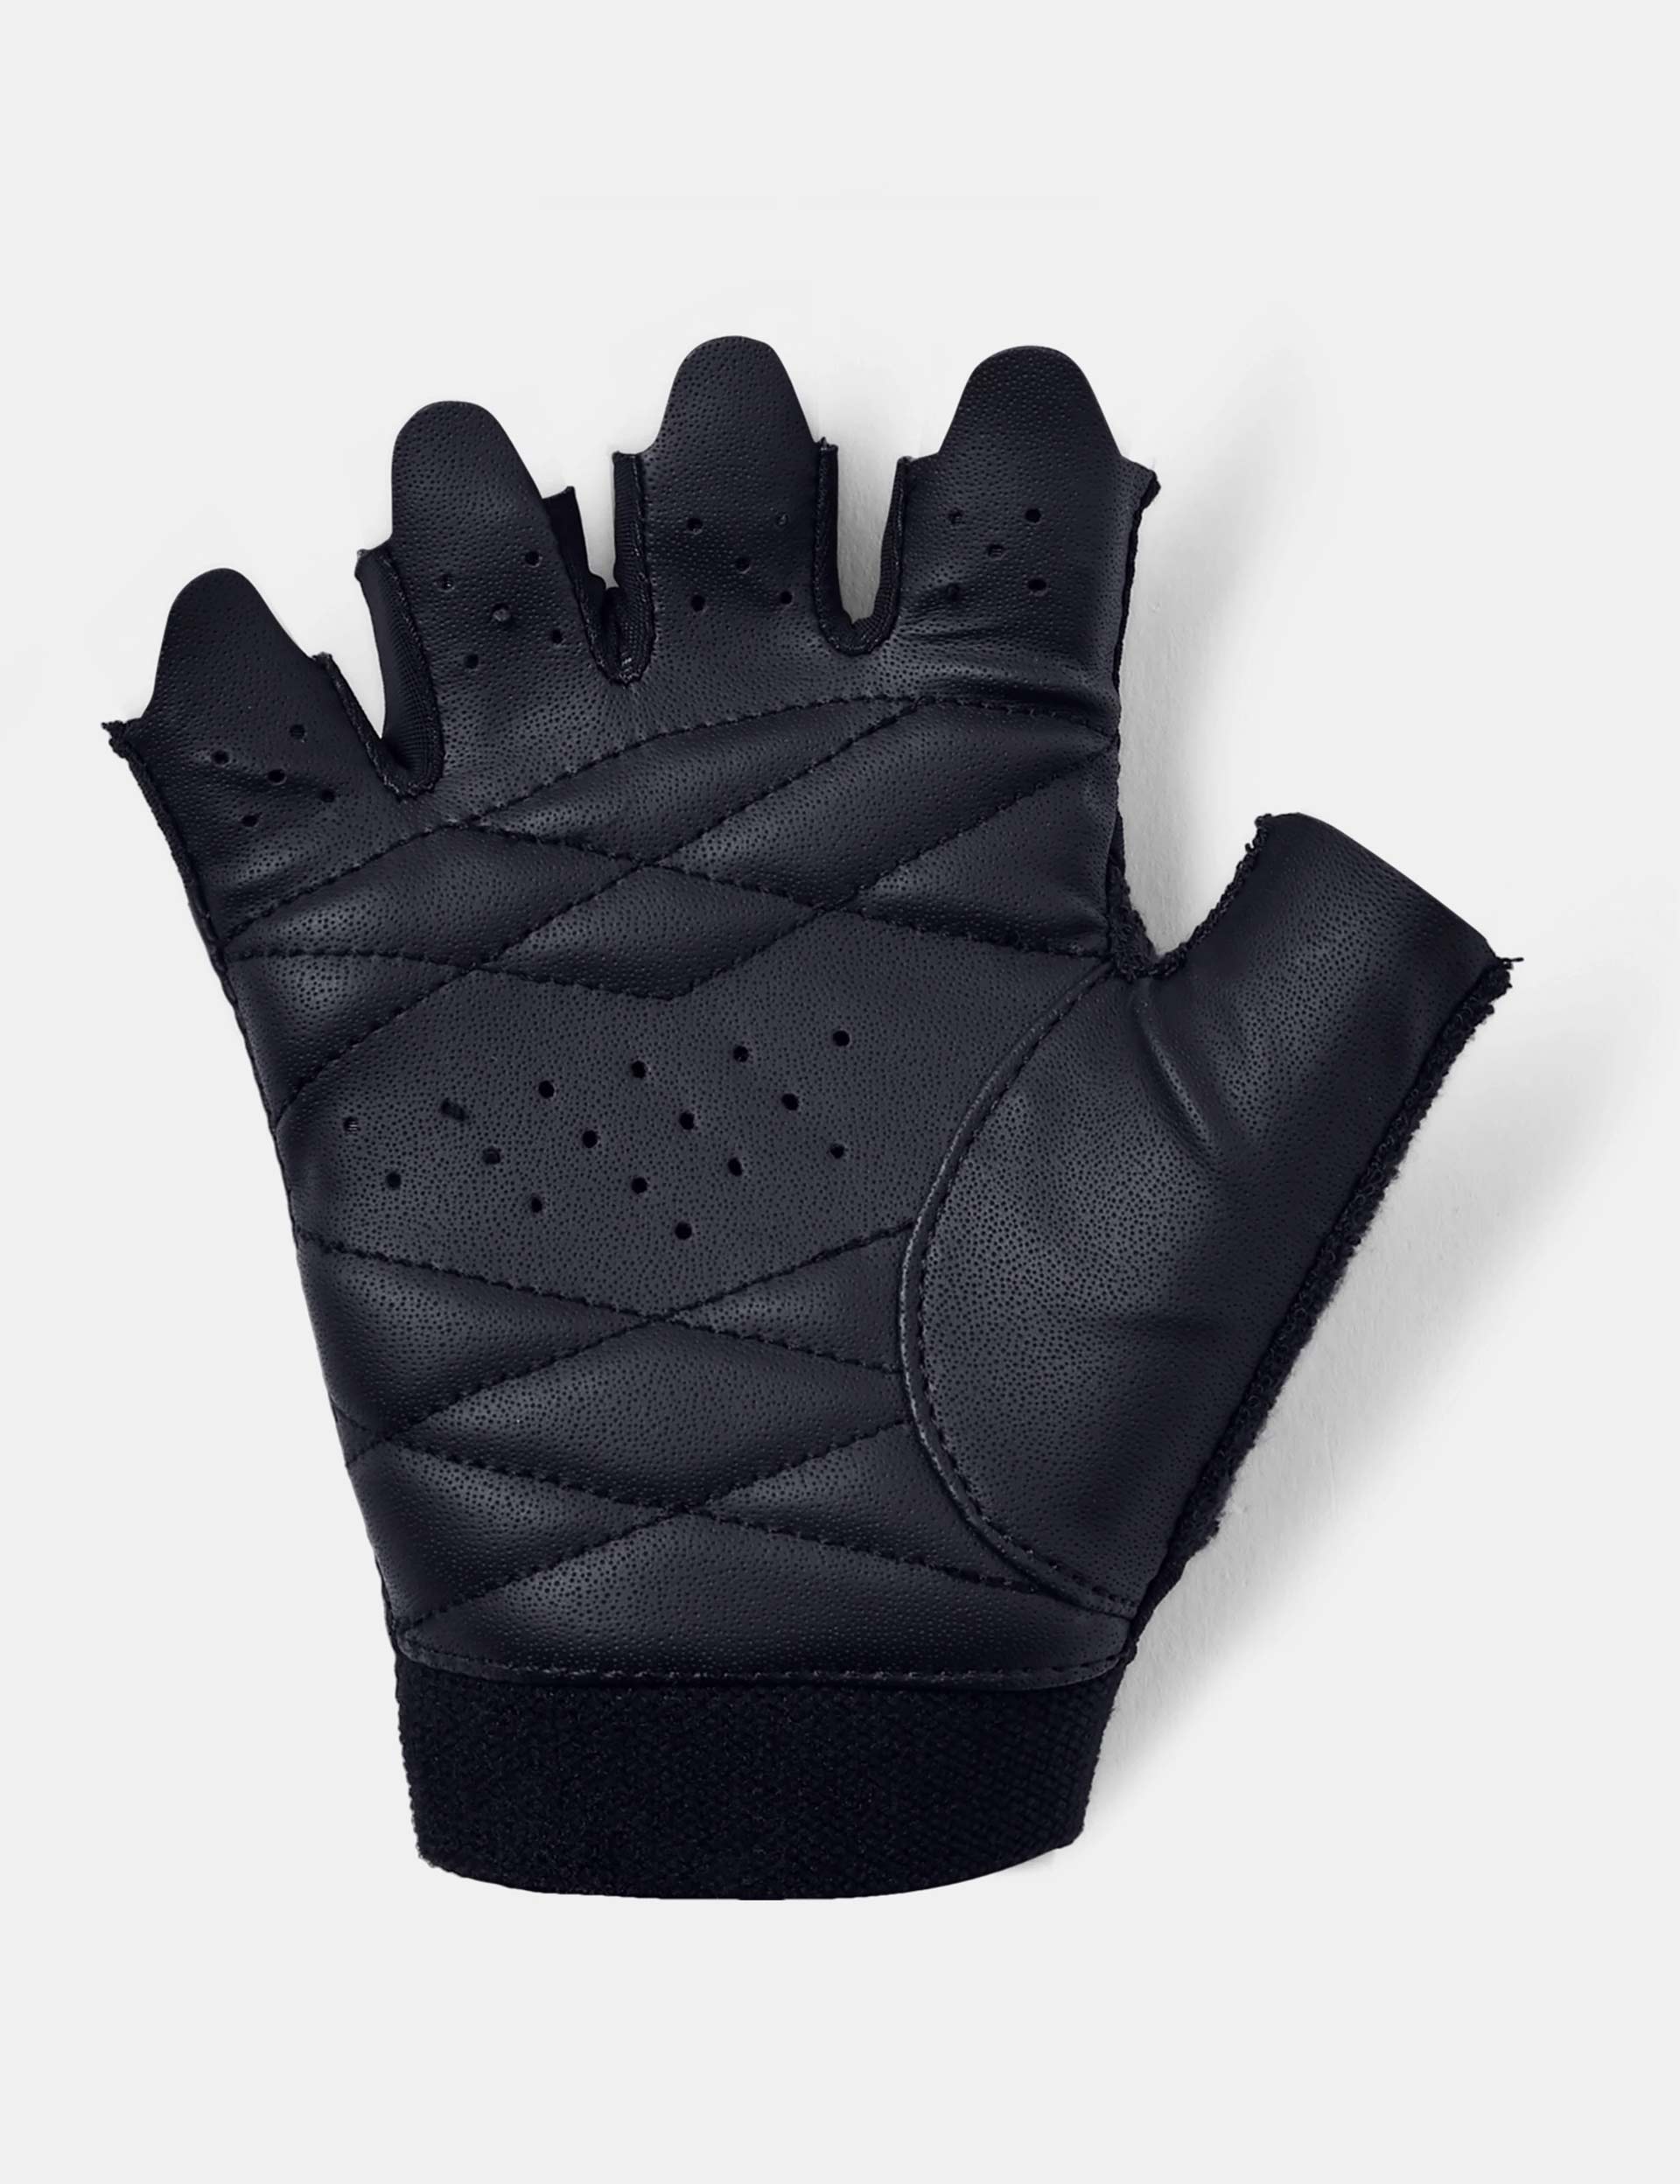 Under Armour Light Training Gloves - Black/Silverimage2- The Sports Edit